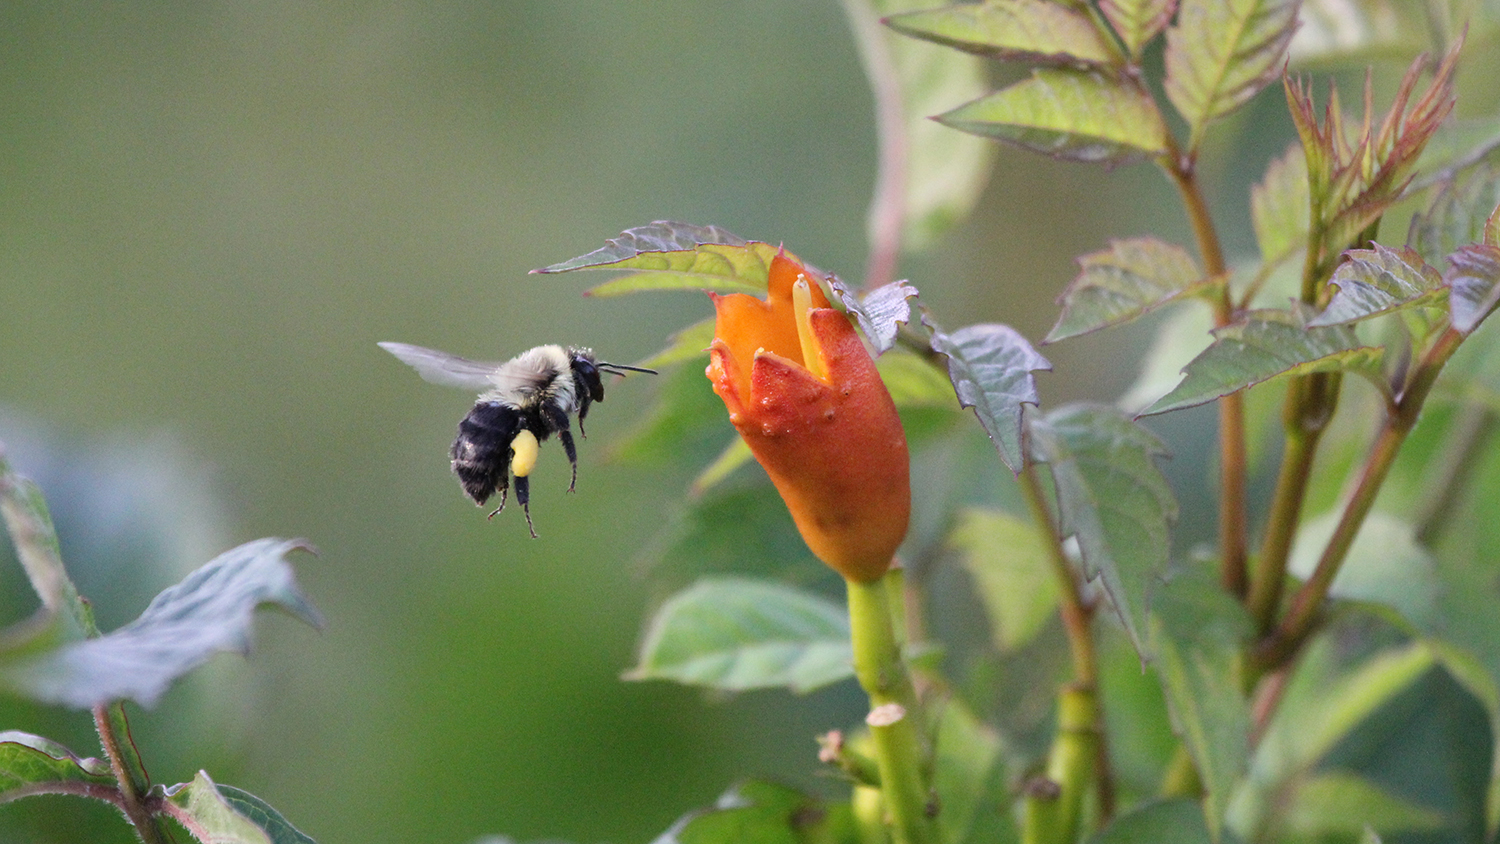 bumblebee hovers near flower